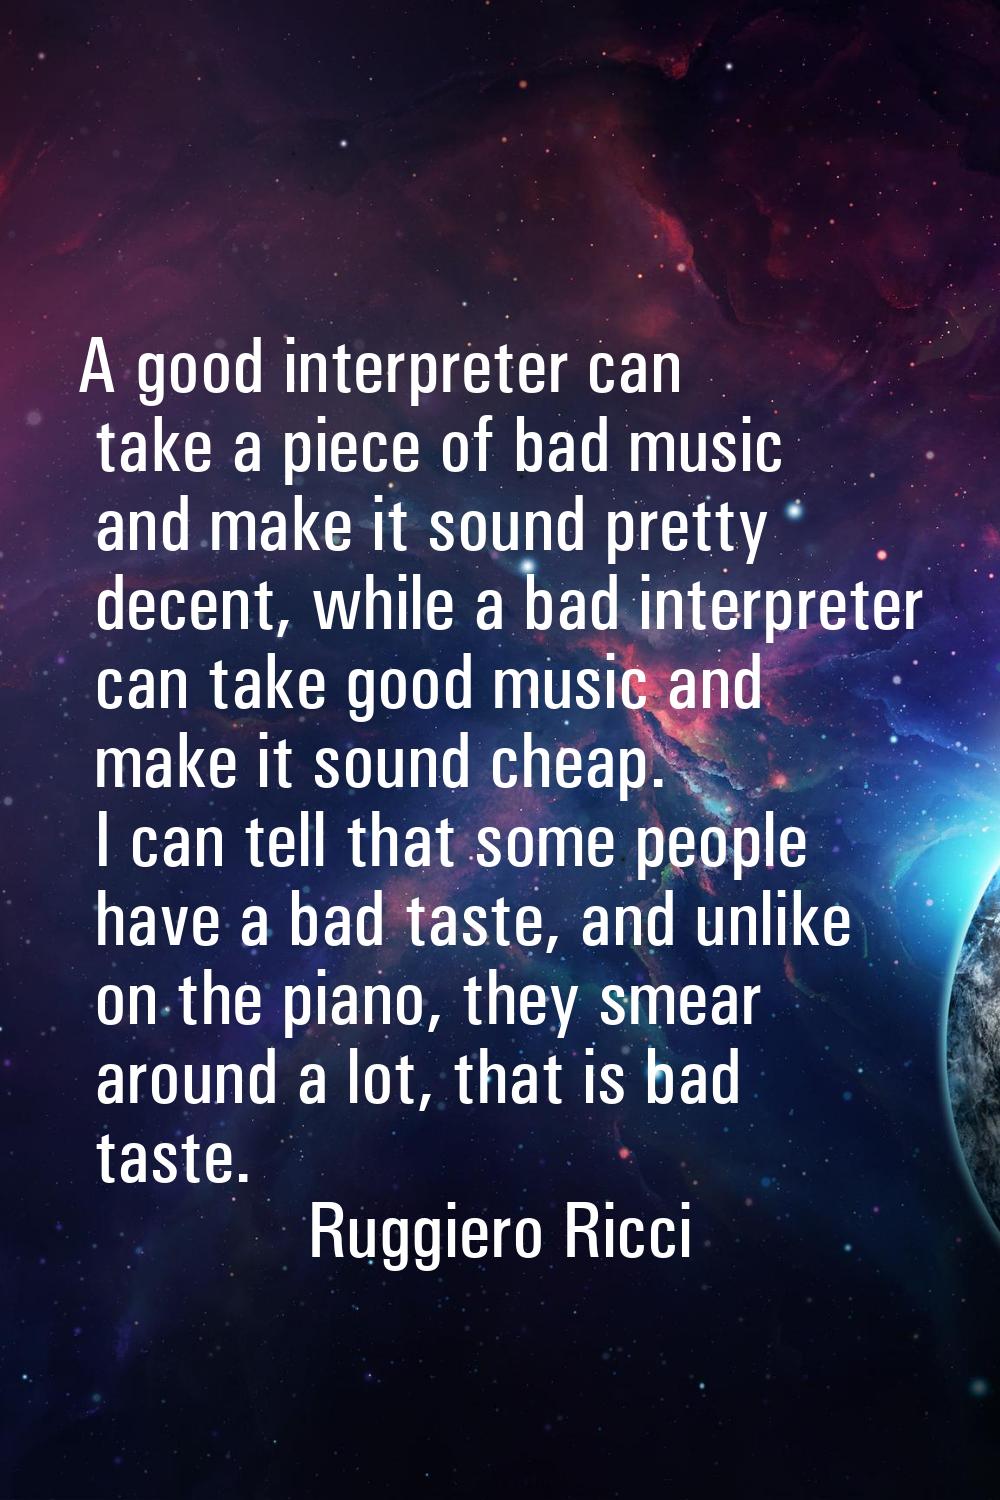 A good interpreter can take a piece of bad music and make it sound pretty decent, while a bad inter